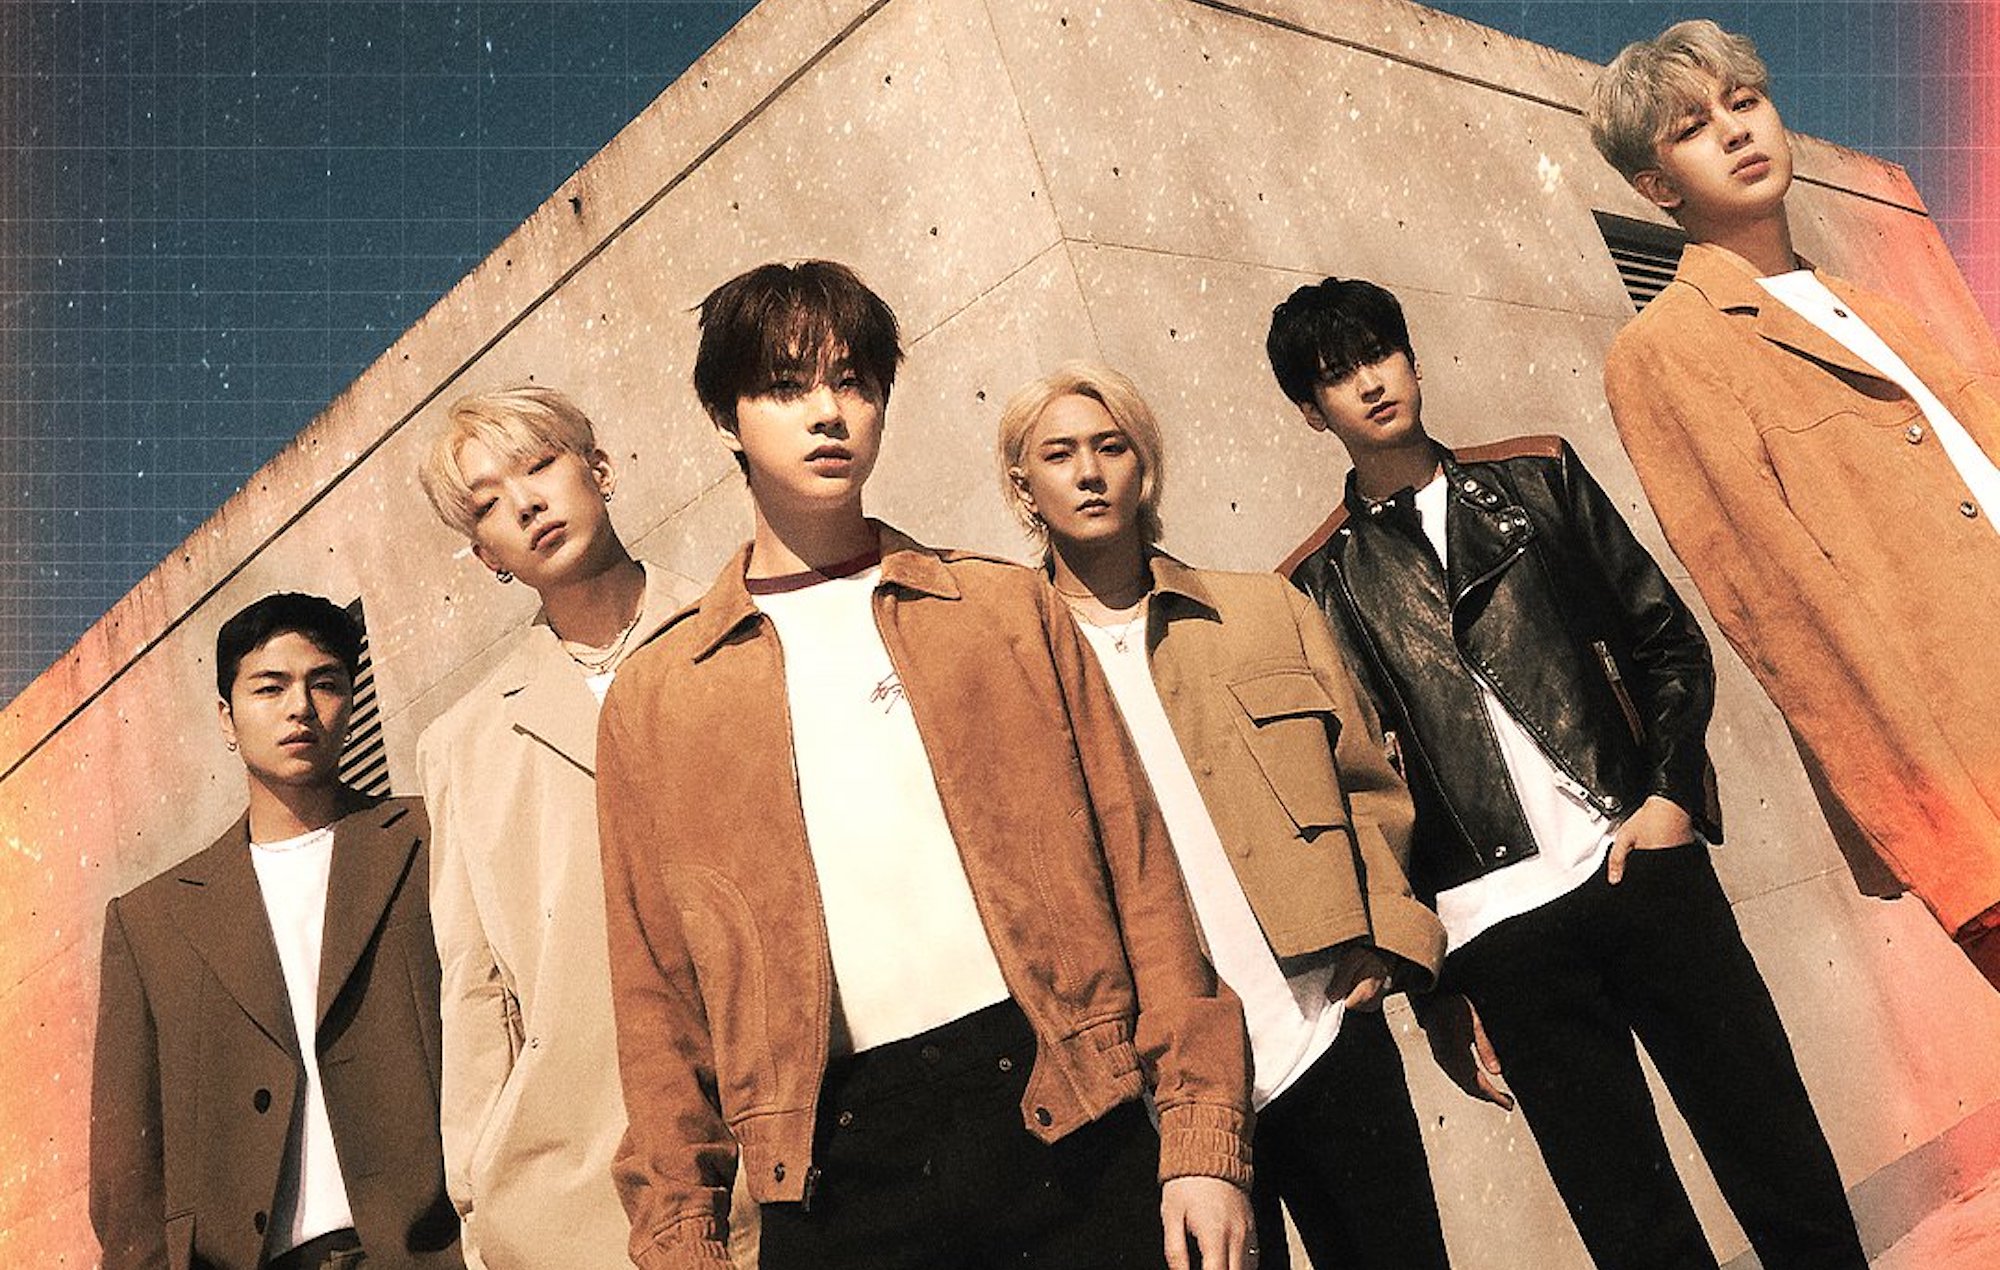 iKON Signs with 143 Entertainment to Release New Album in April